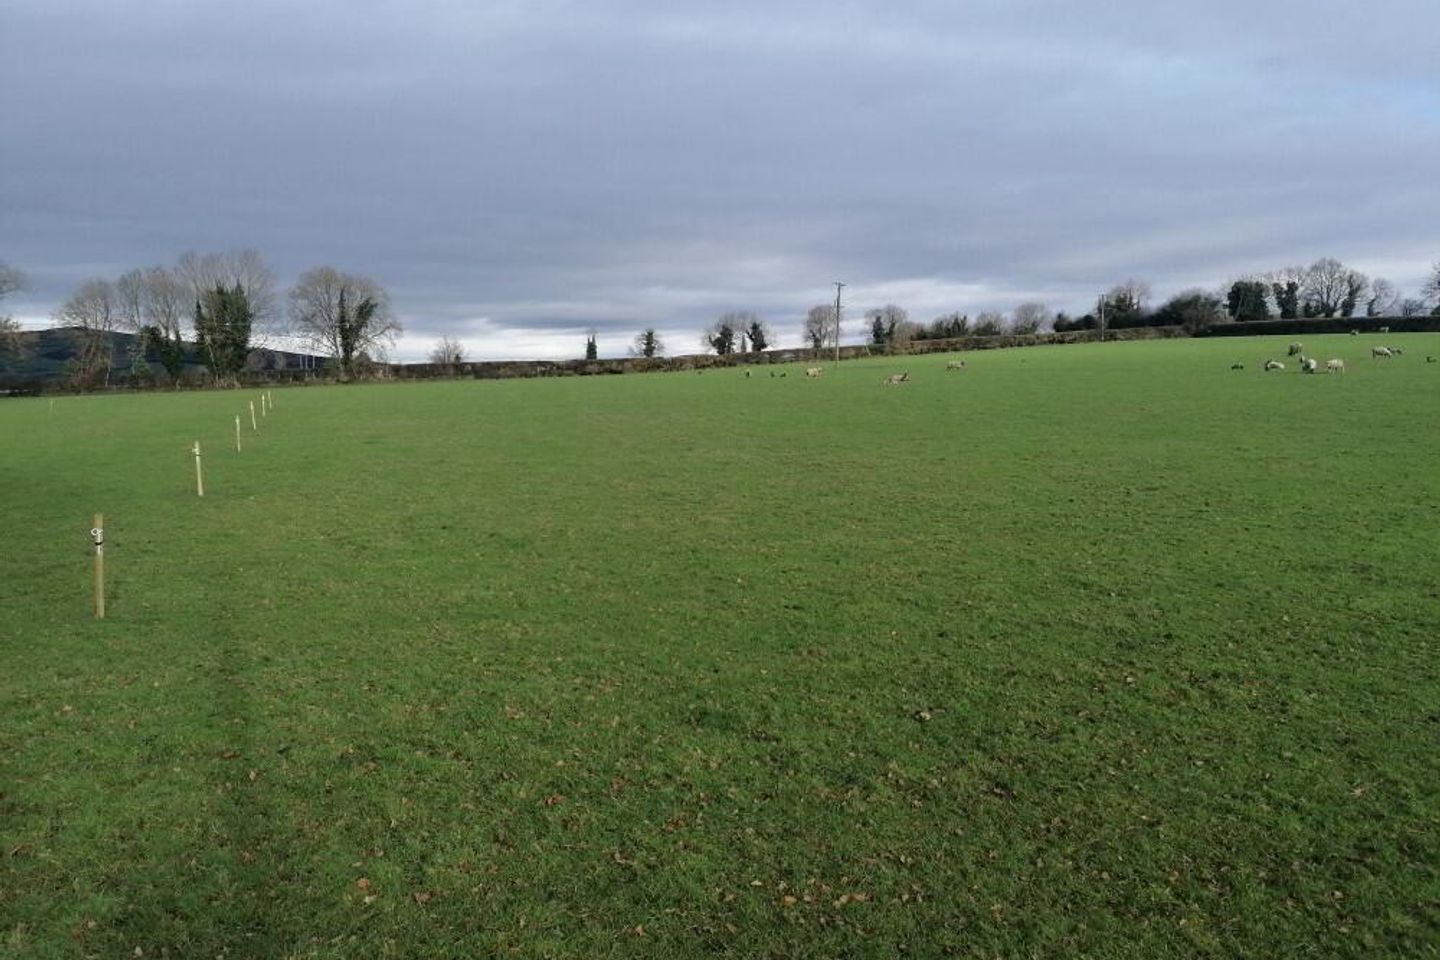 Mount Kelly, Rathvilly, Co. Carlow